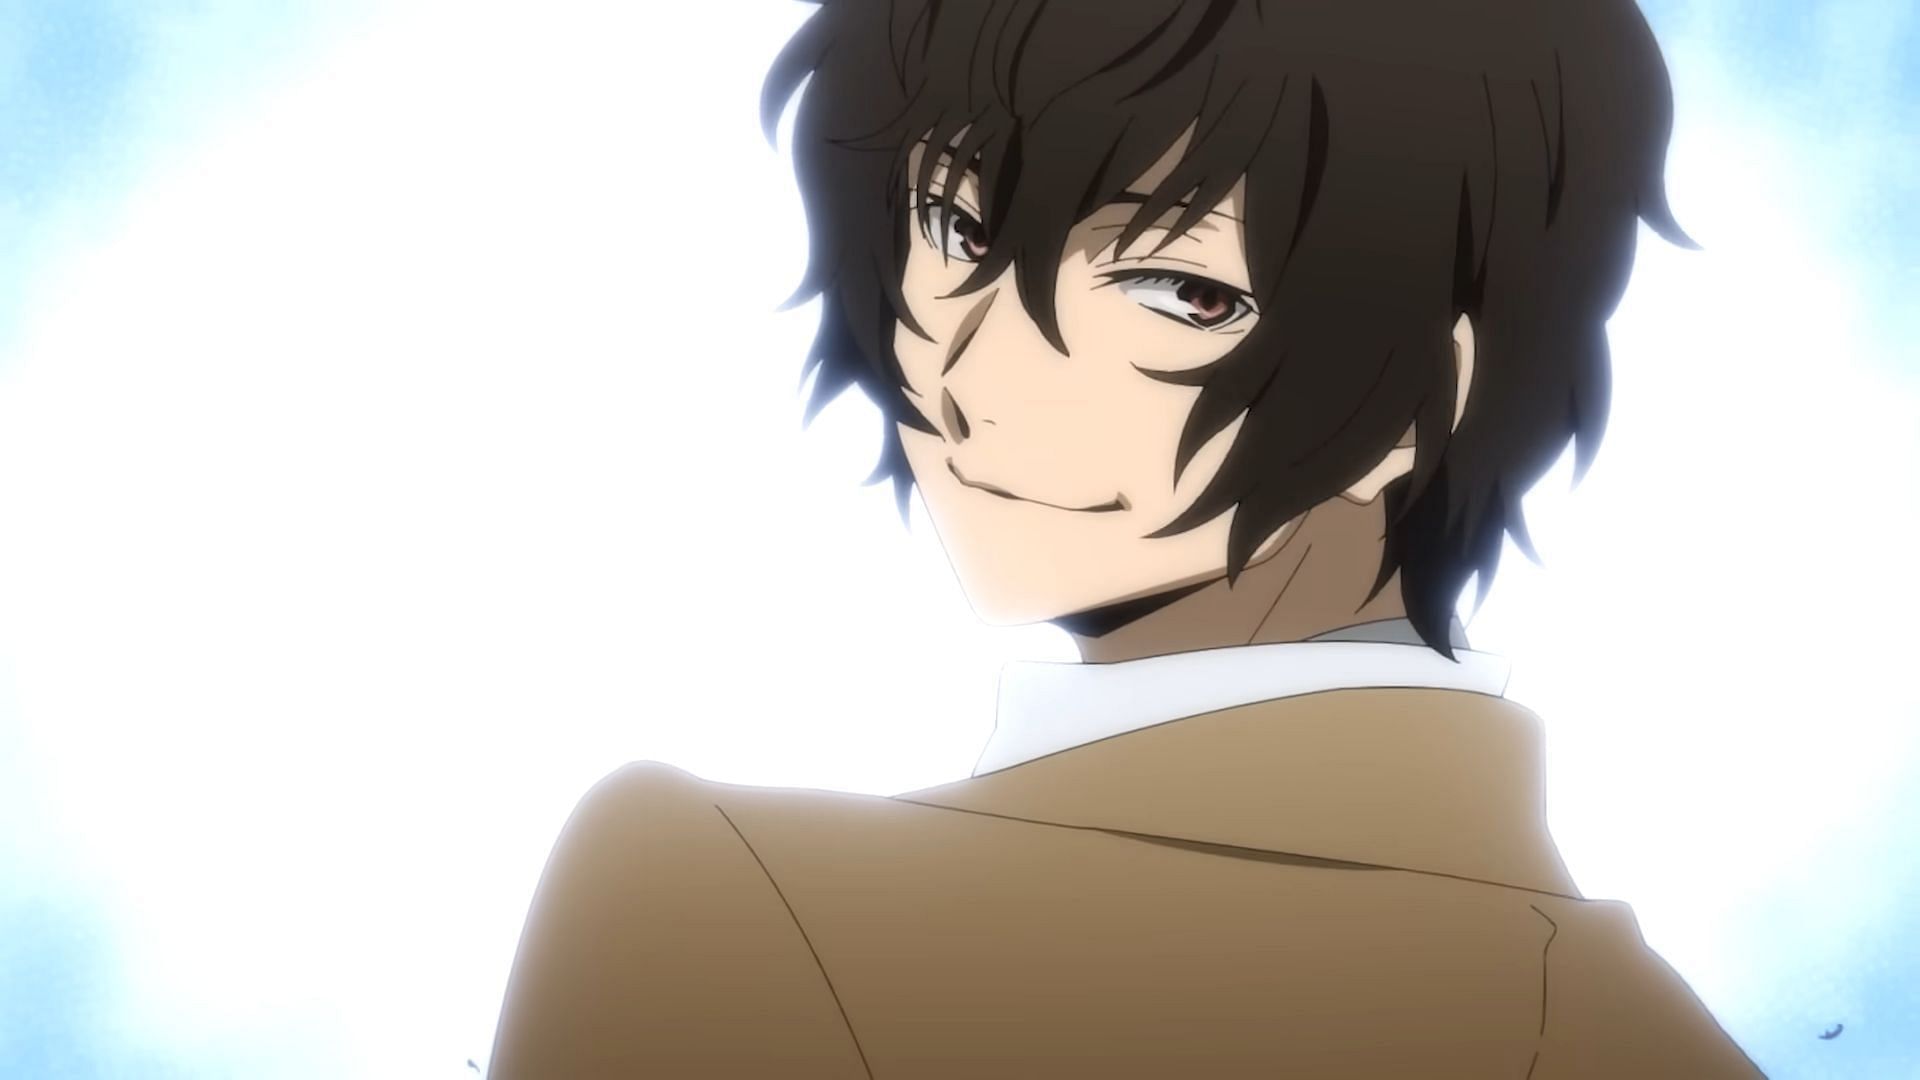 Bungo Stray Dogs Season 5 Confirmed to Animate Dazai and Chuuya's Most  Heartbreaking Moment Yet